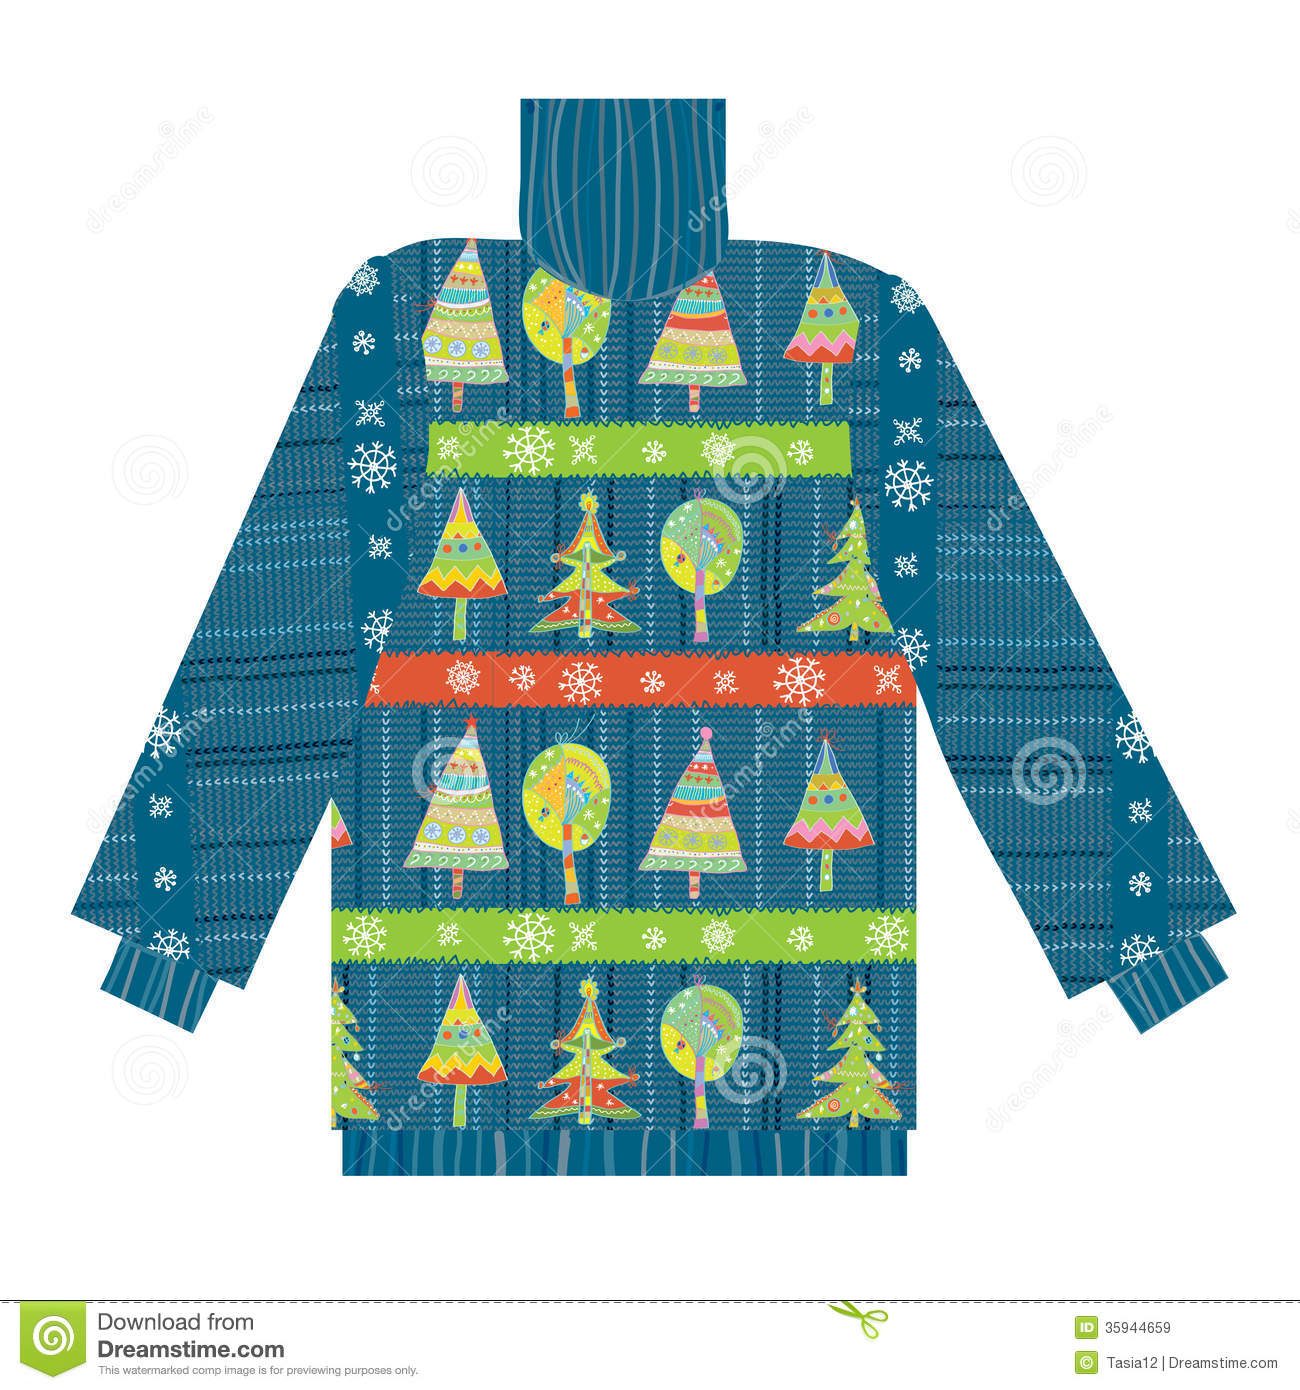 Christmas Sweater Knitted Pattern With Trees And Snow Royalty Free